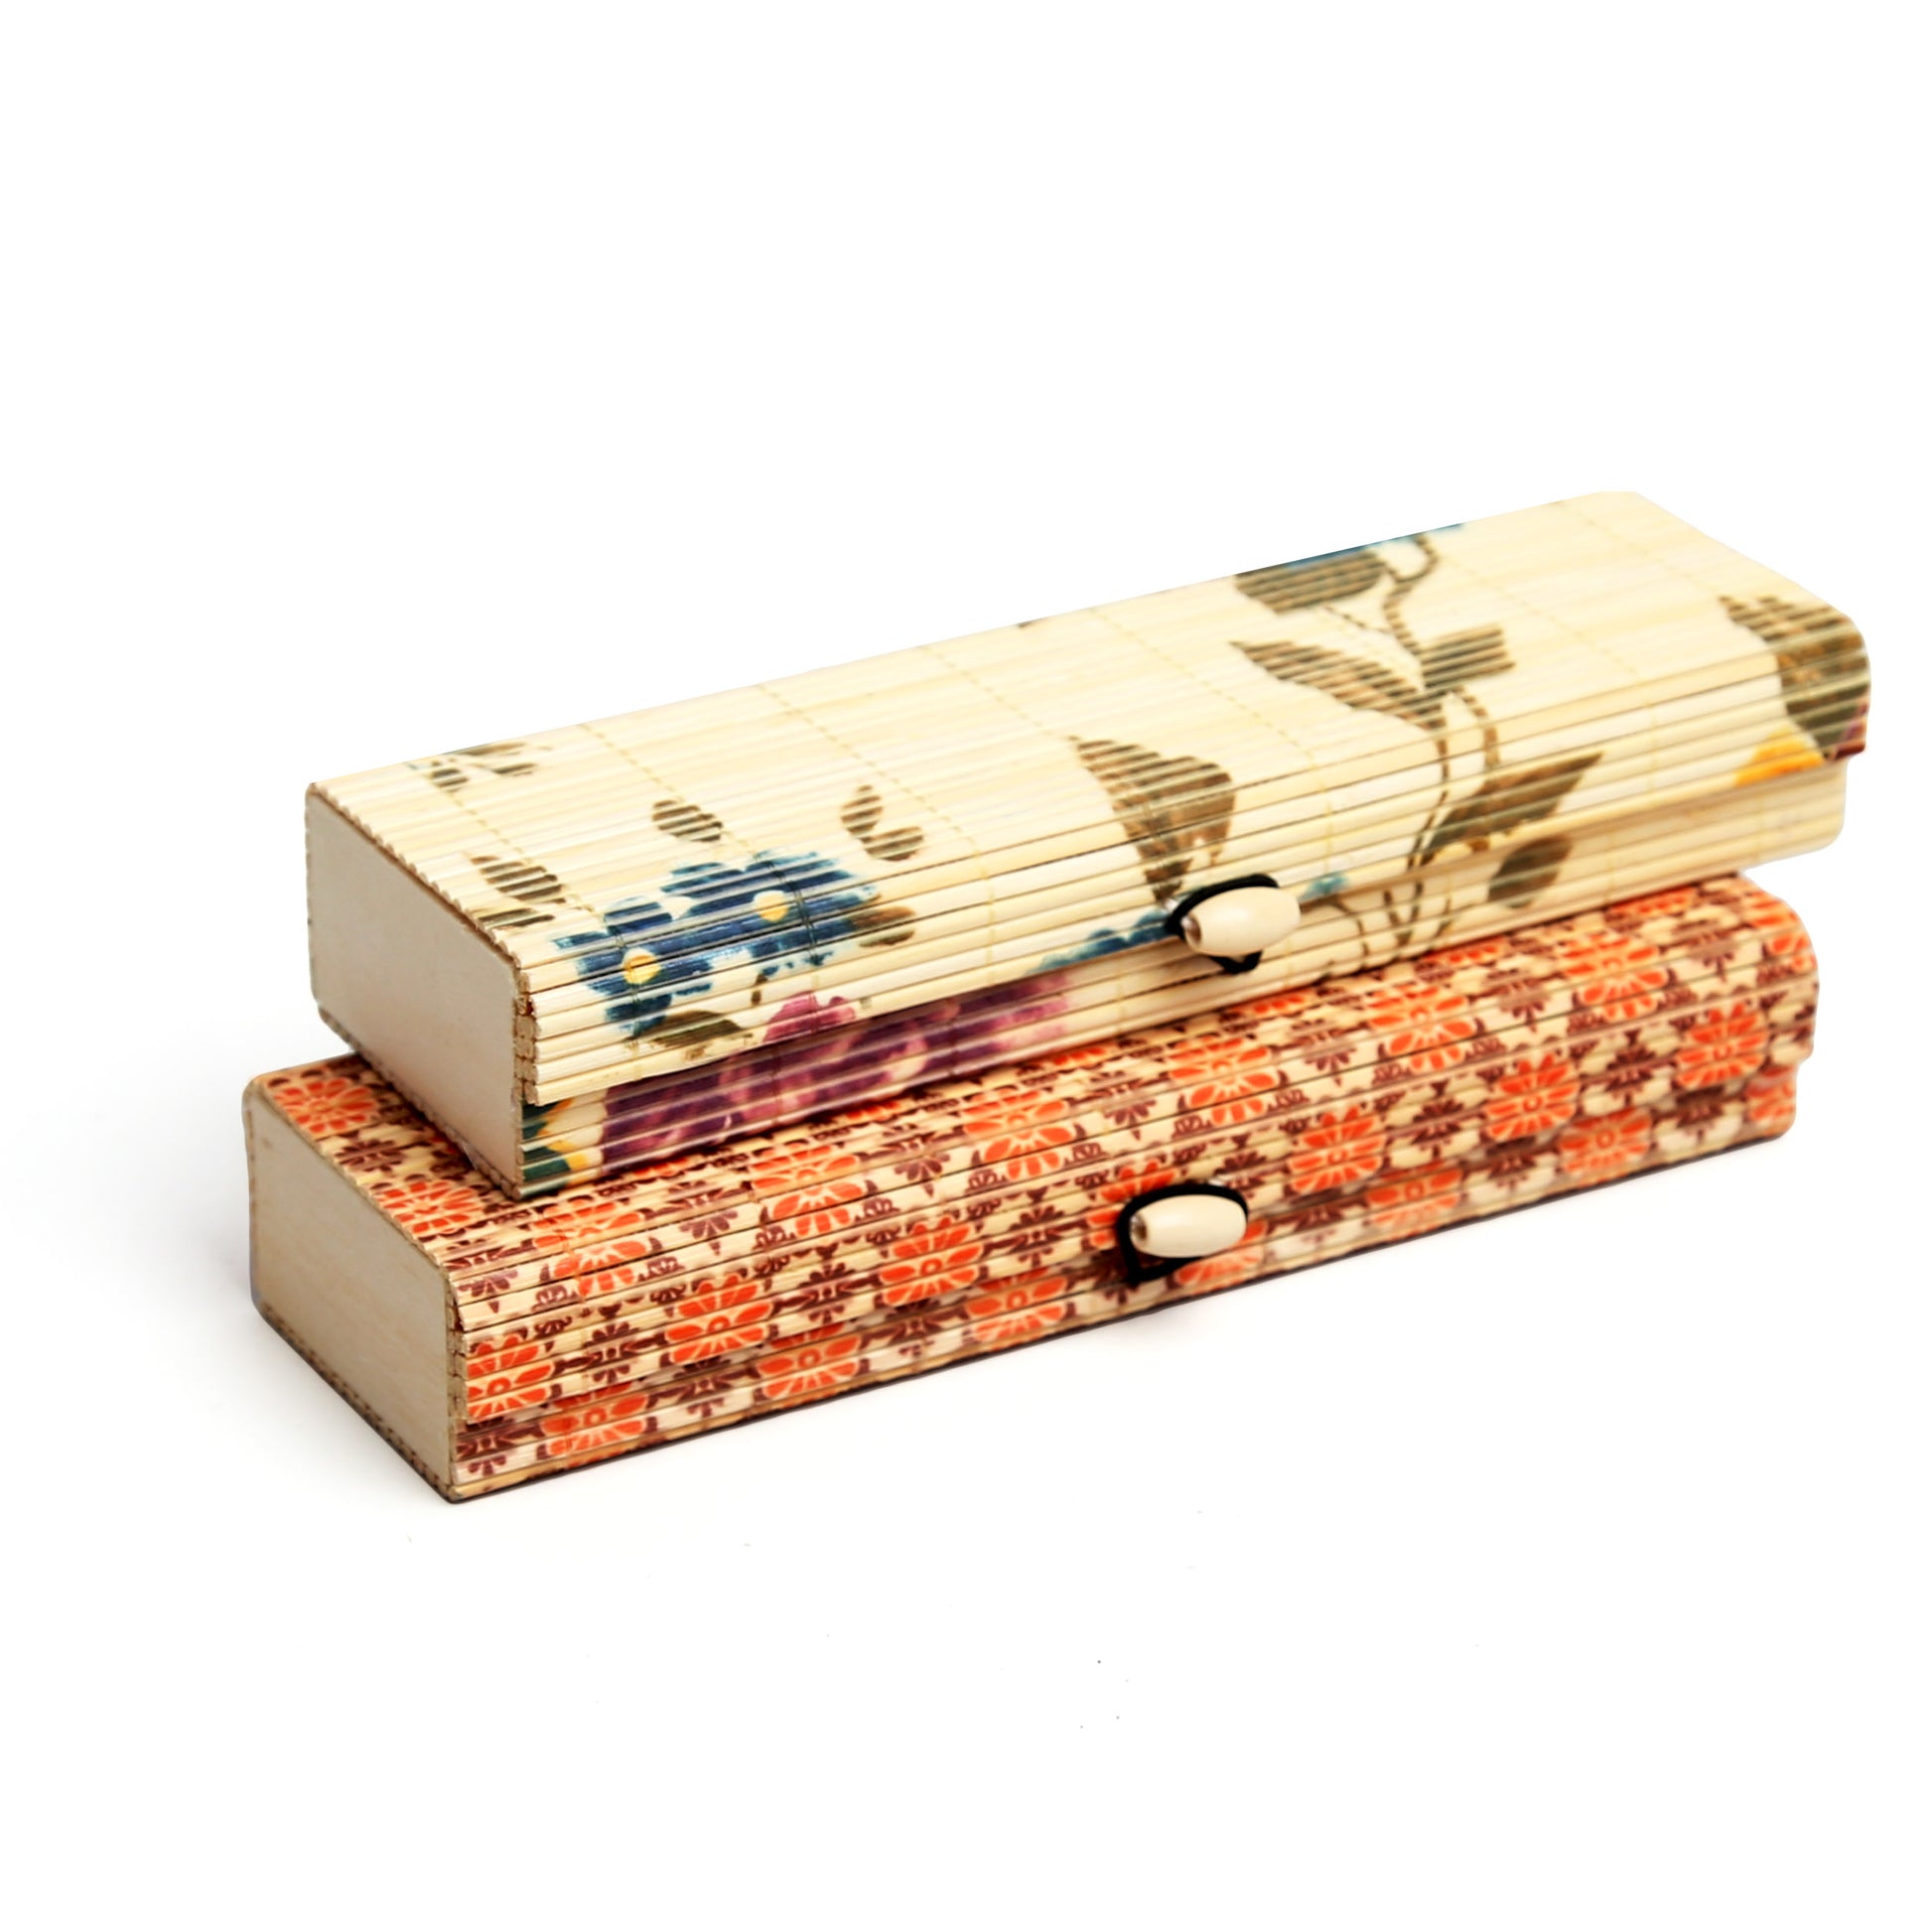 DAISYLIFE Bamboo Printed Design Long Box for Stationery, Storage, Utility & Gifts - Set of 2